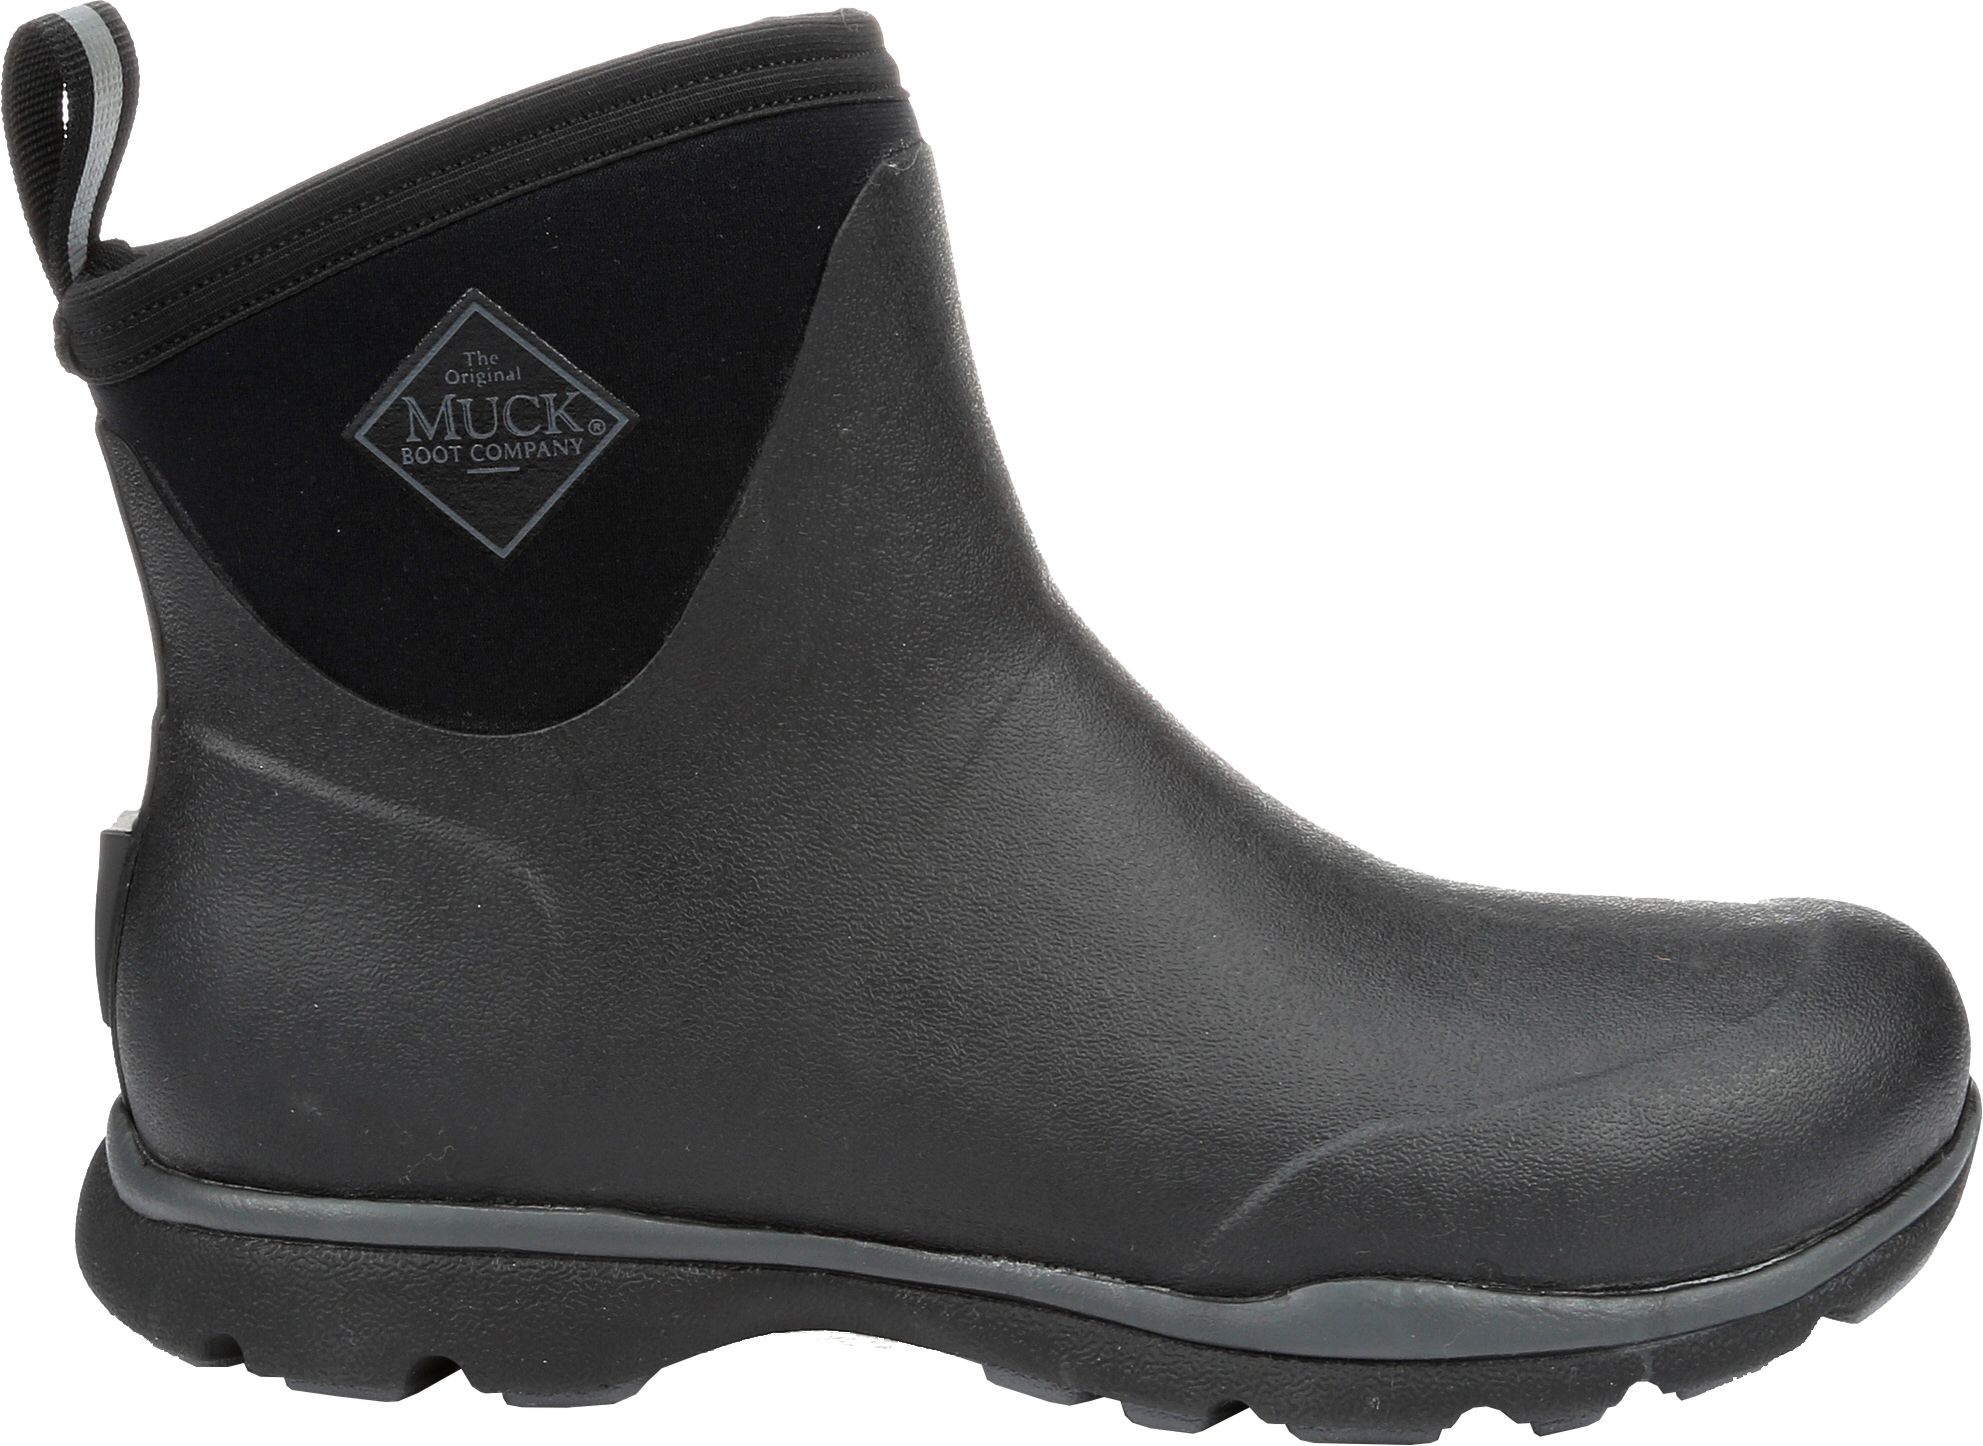 Muck Boots | DICK'S Sporting Goods